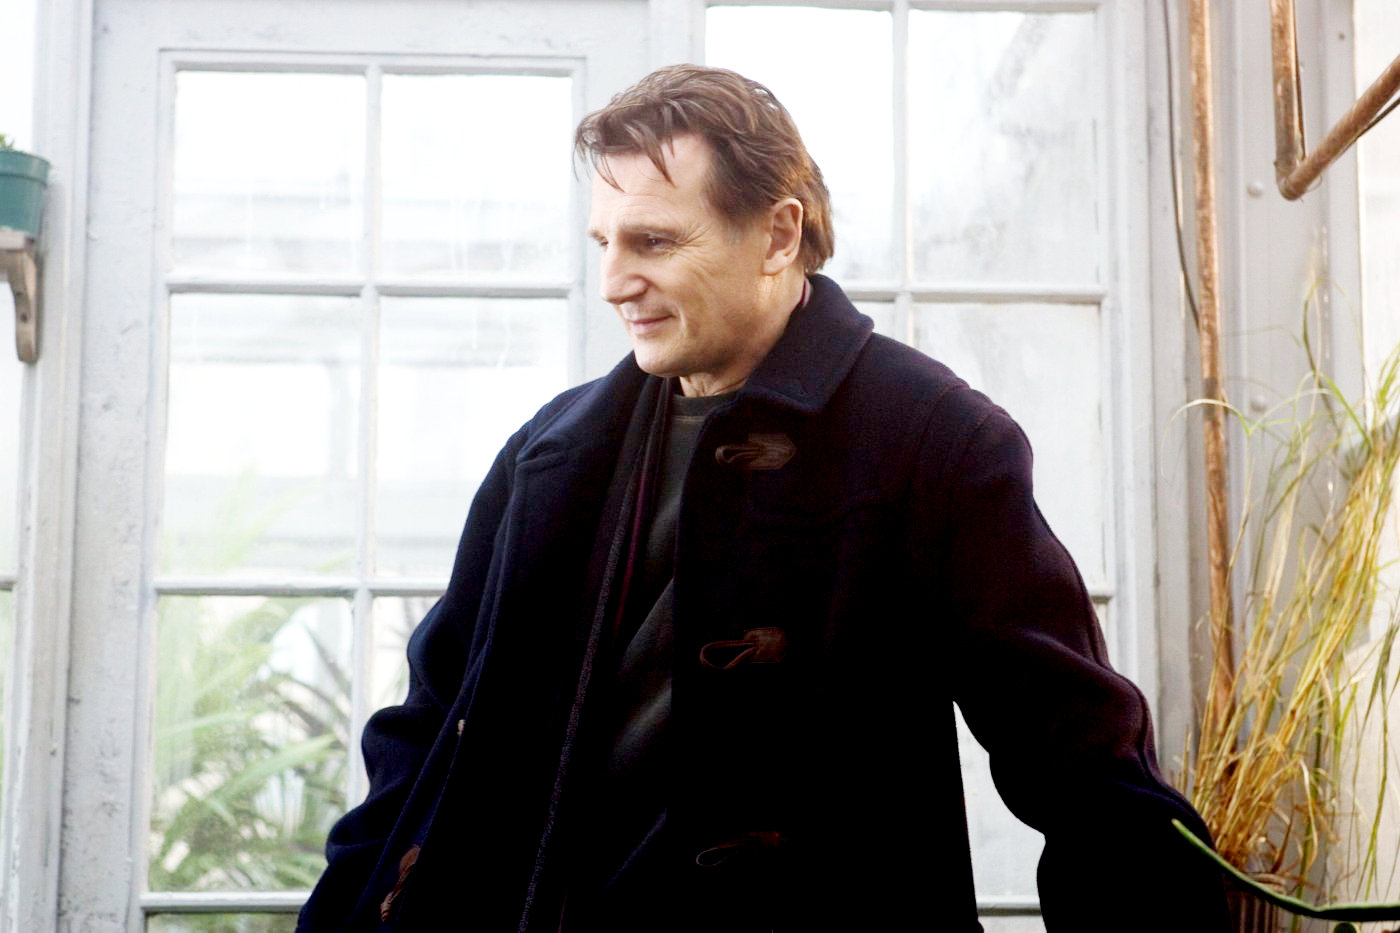 Liam Neeson stars as David in Sony Pictures Classics' Chloe (2010)